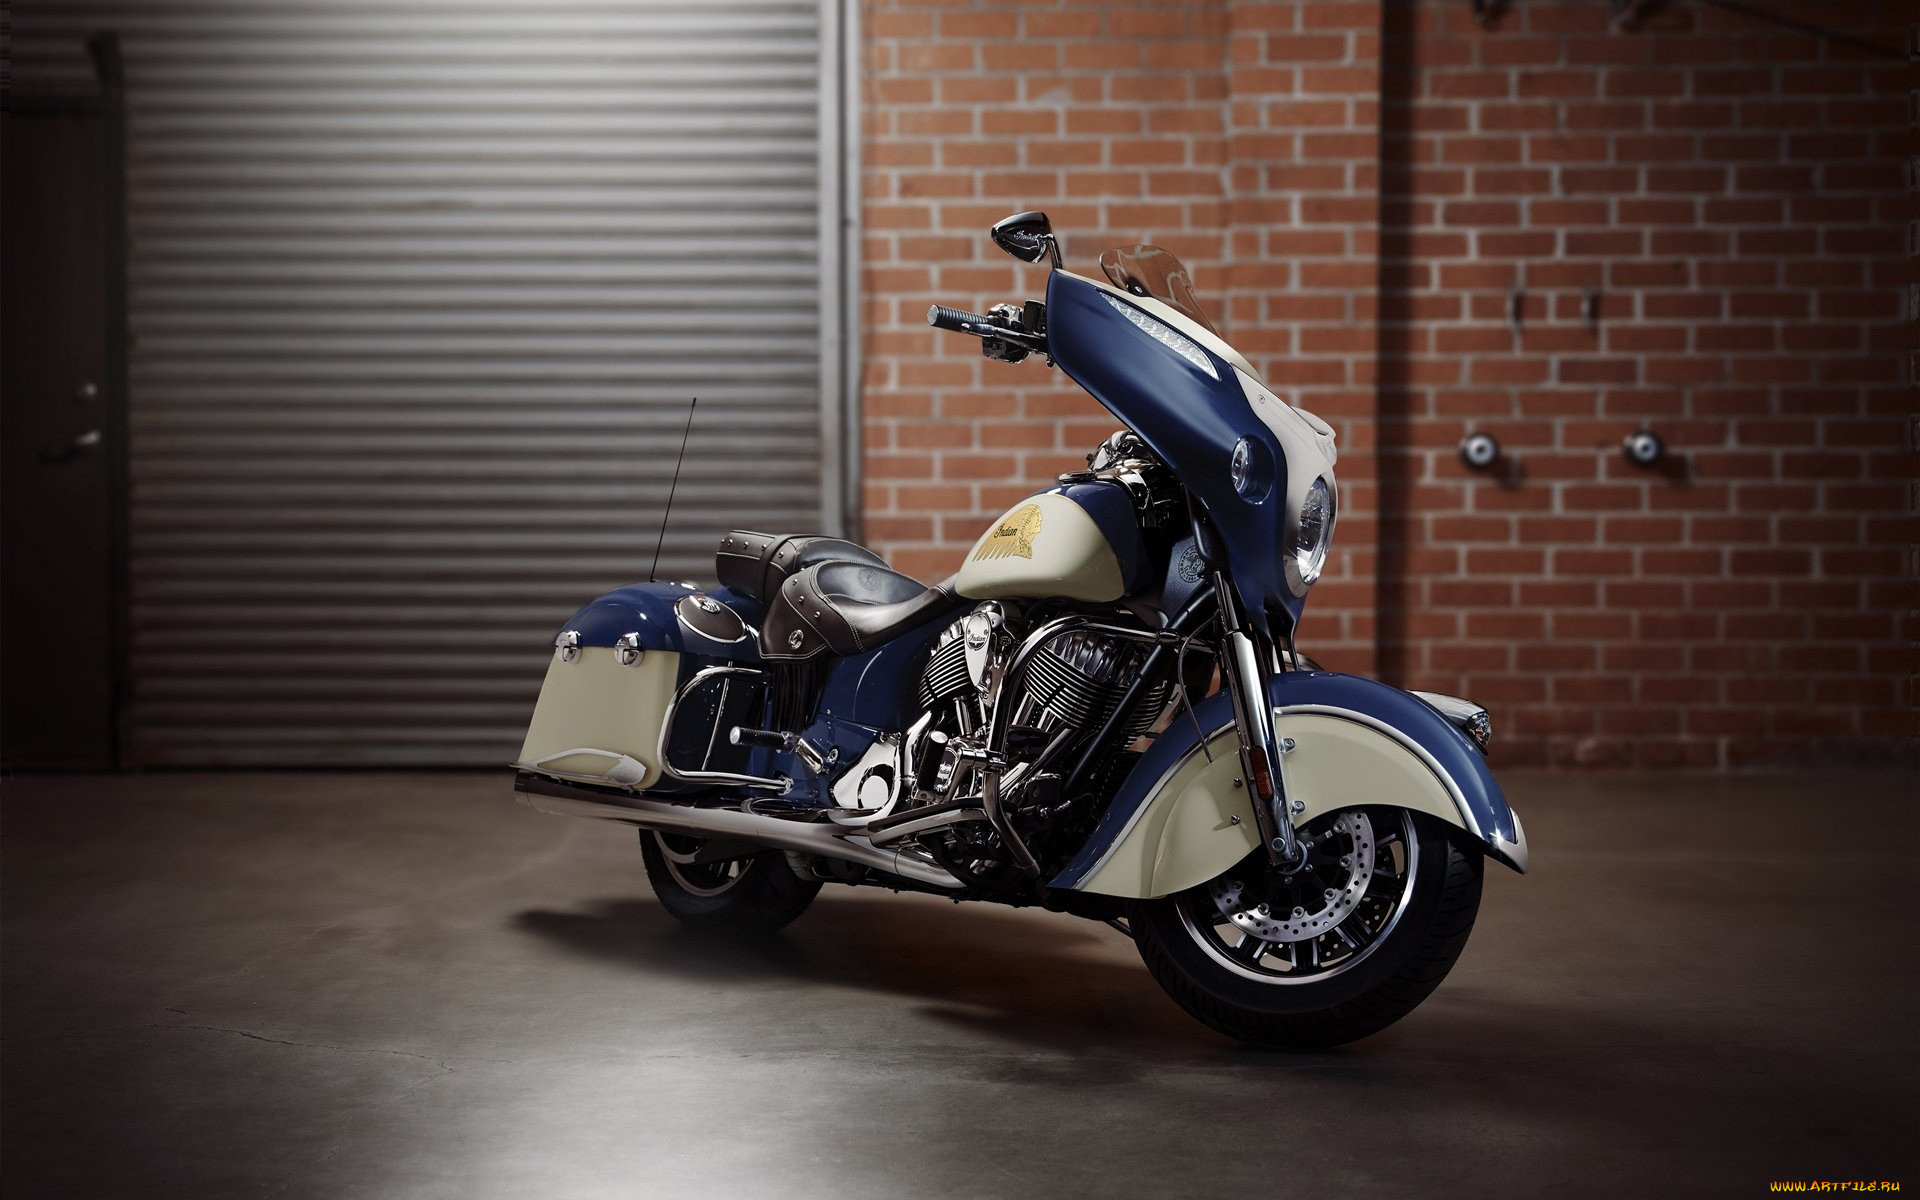 2020 indian chieftain, , indian, , chieftain, 2020, 